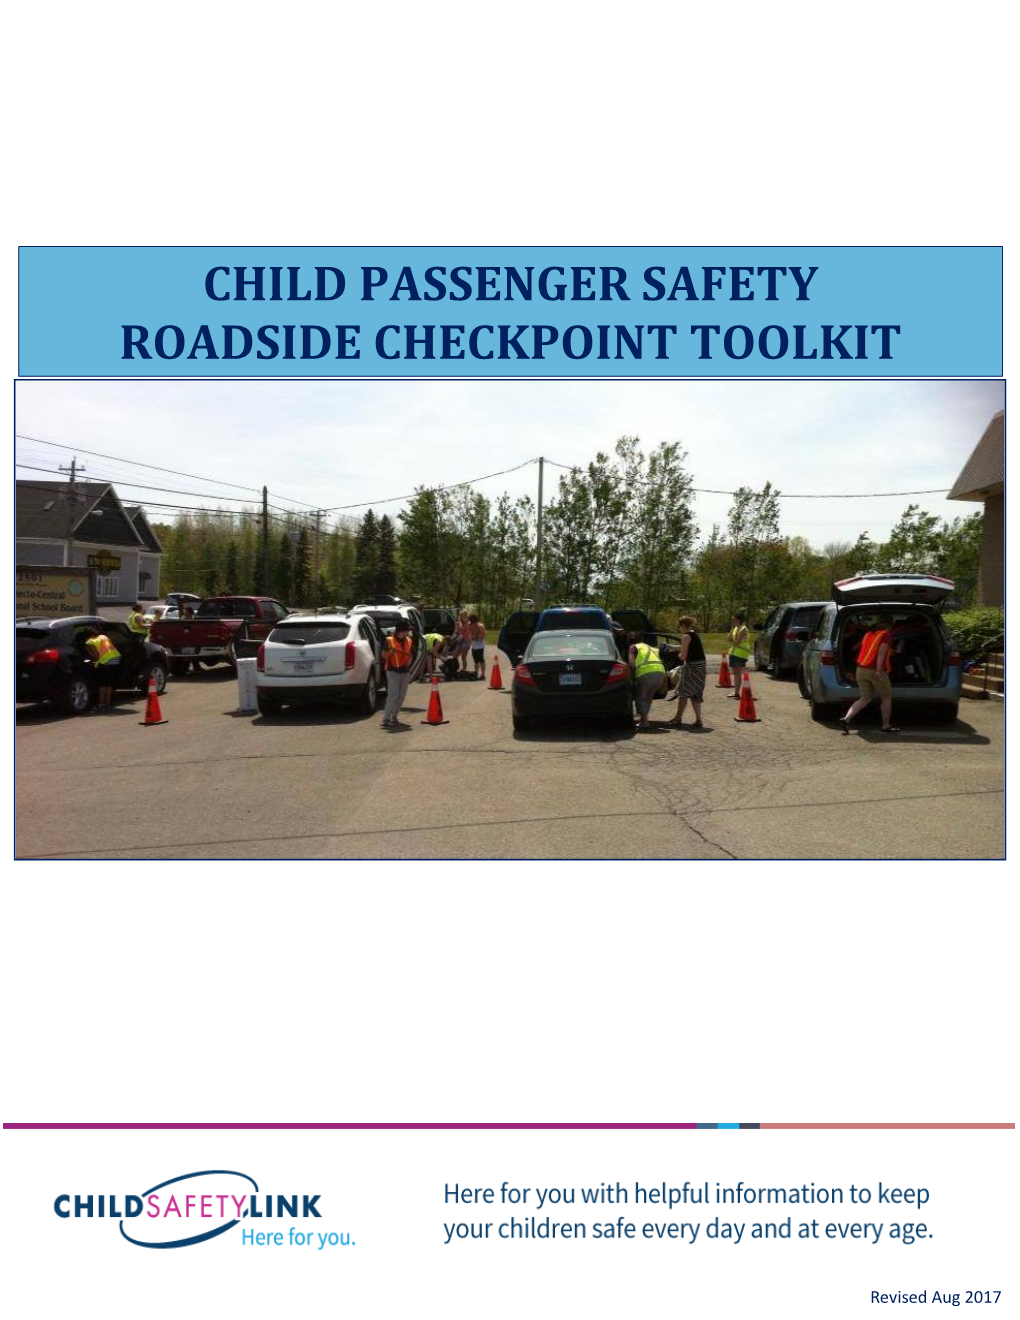 Child Passenger Safety Roadside Checkpoint Toolkit